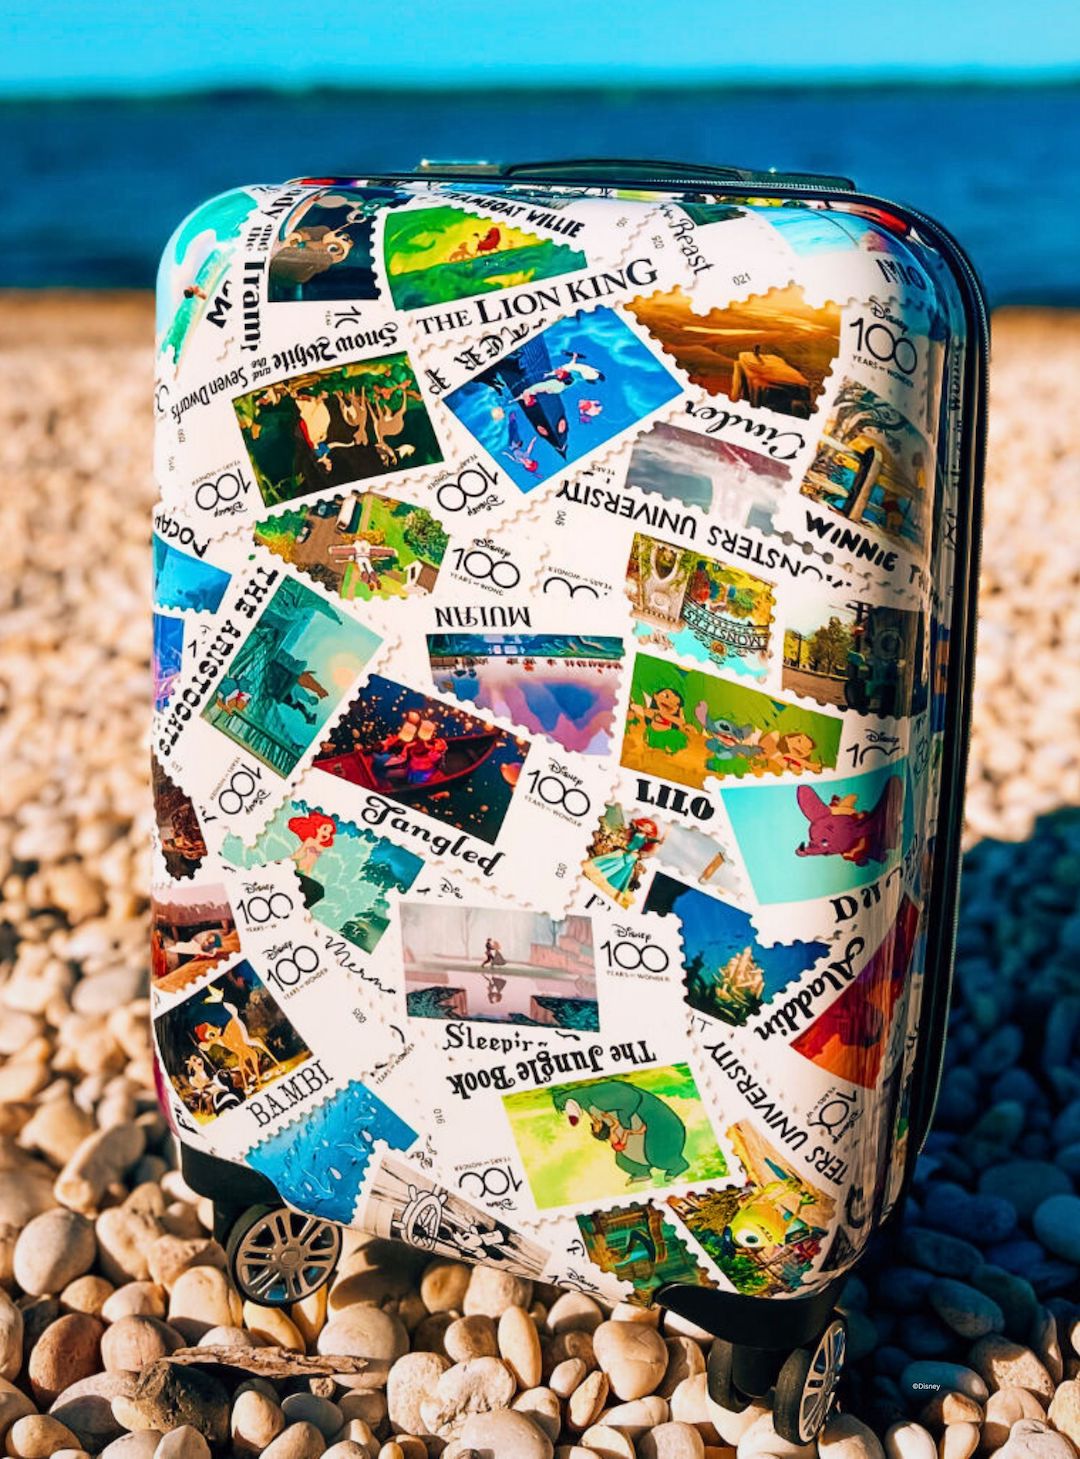 Ful Disney Stamps ABS Hardsided Spinner Suitcase 22" carry-on Luggage 360 spinner wheels Limited Edition retractable handle